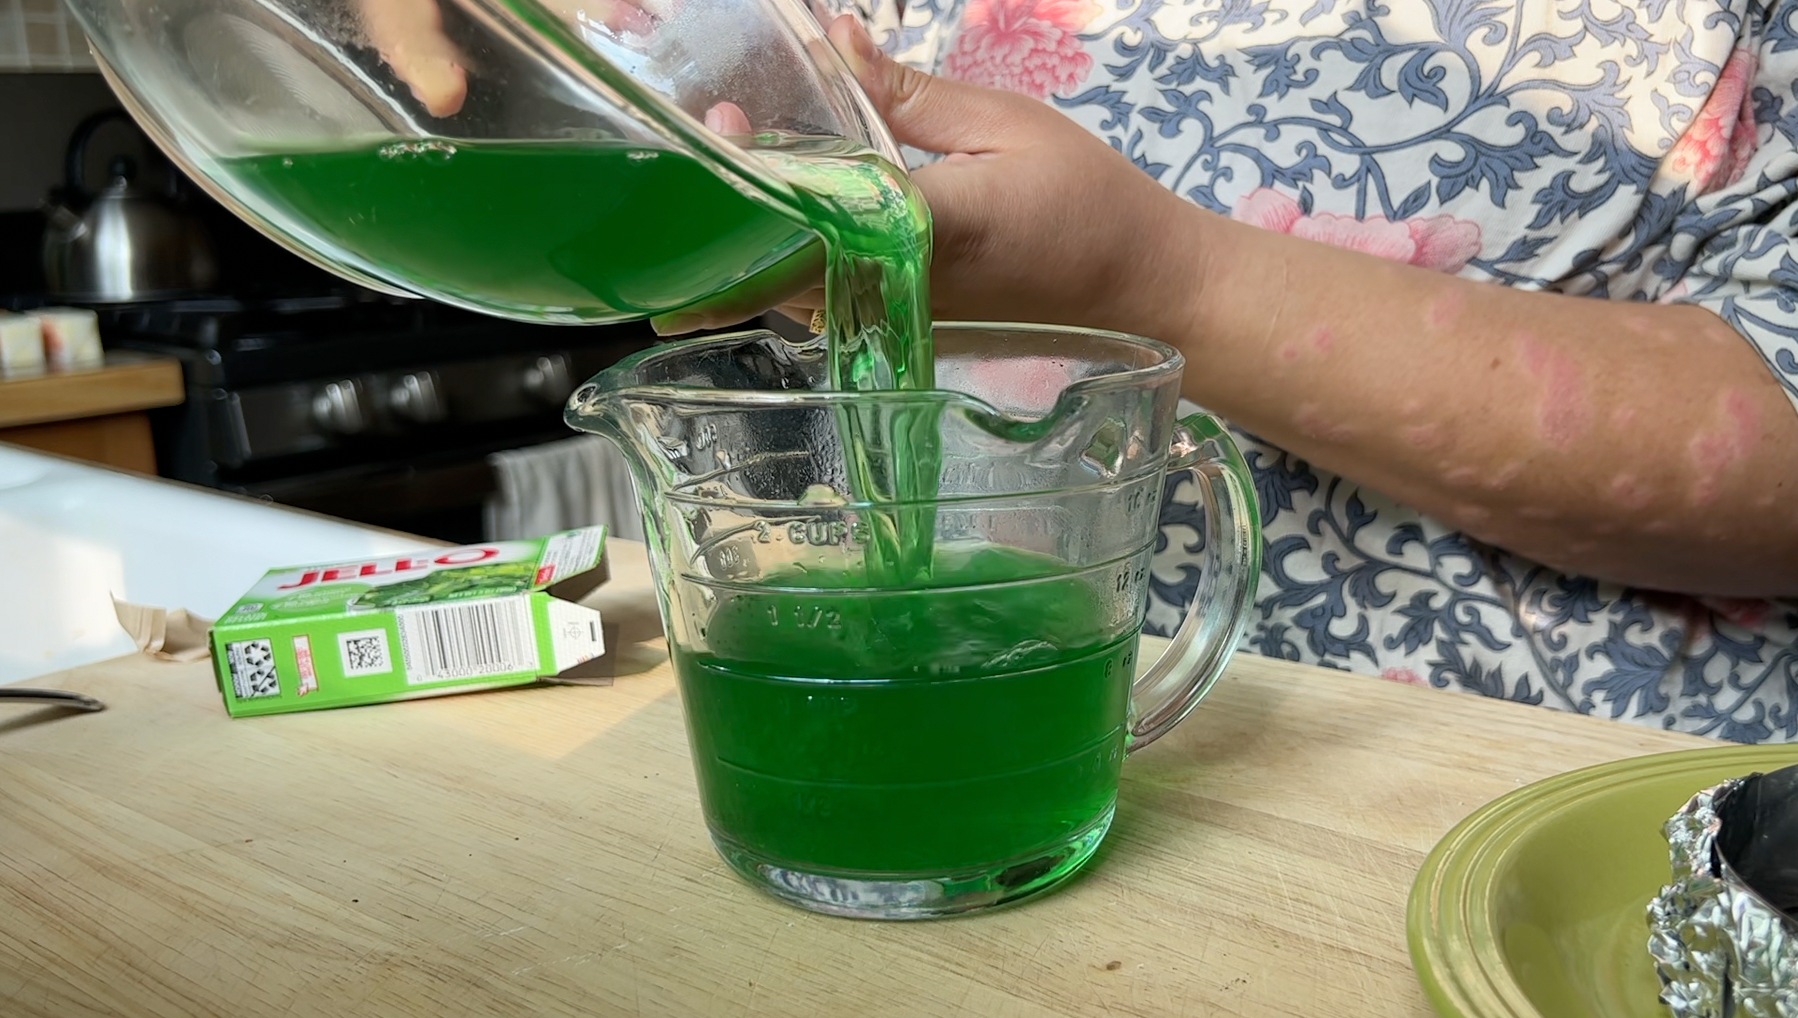 Pouring green jello mix into a clear glass measuring cup